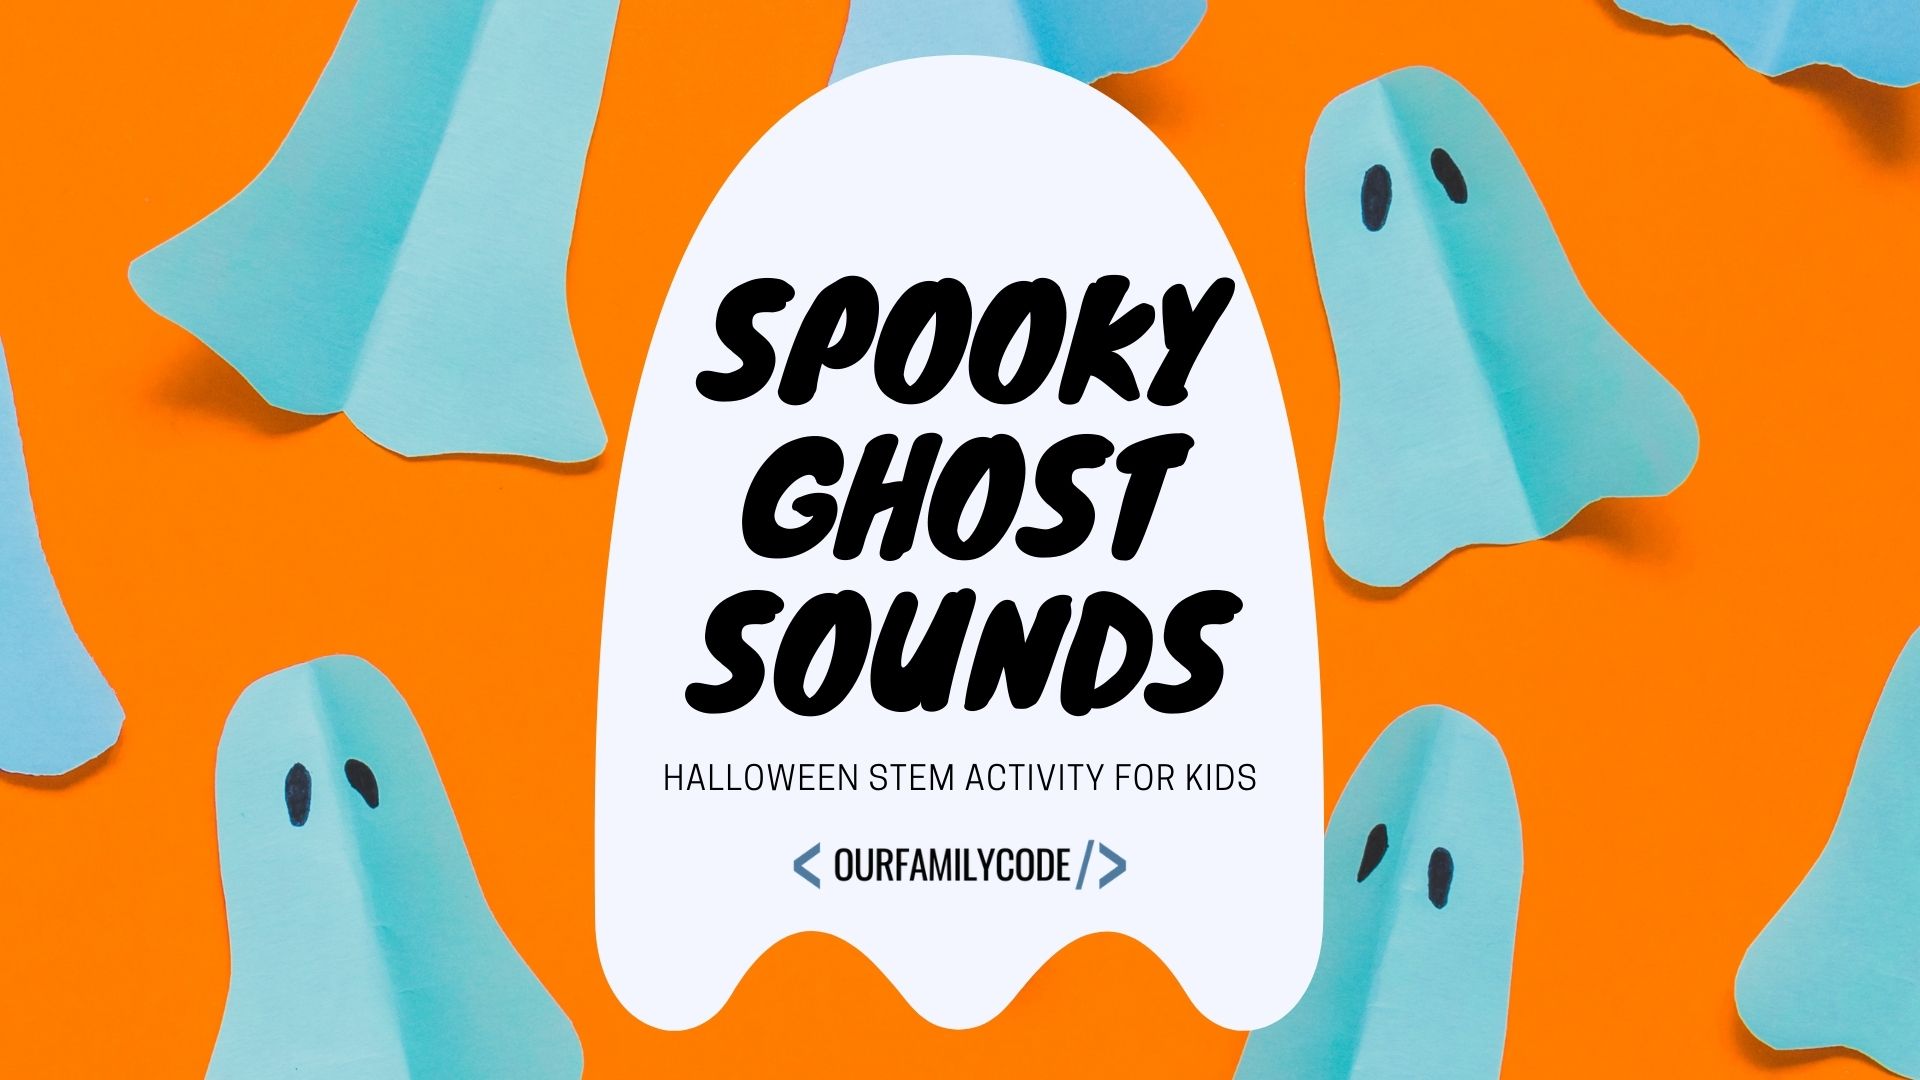 BH FB spooky ghost sounds halloween stem activity for kids